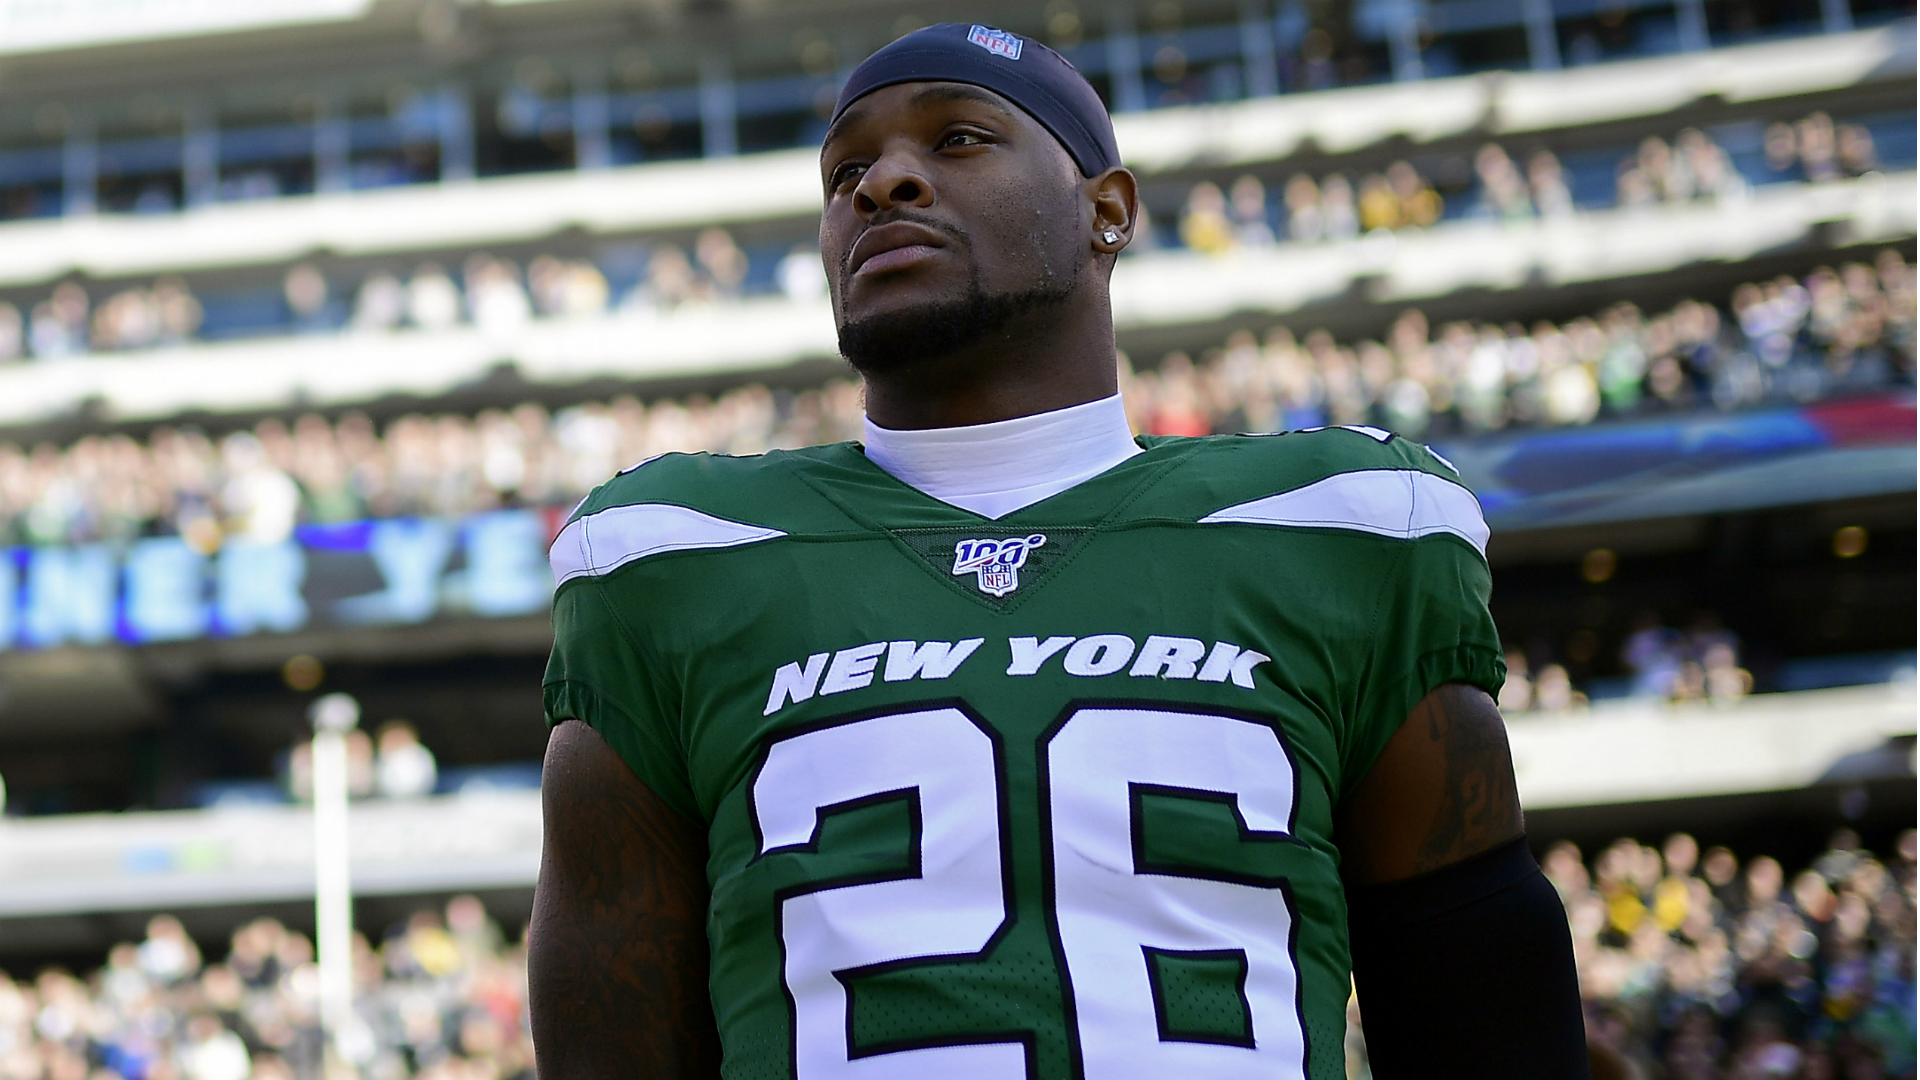 Le'Veon Bell struggled in his first season with the New York Jets, but the franchise are not shopping the running back around.